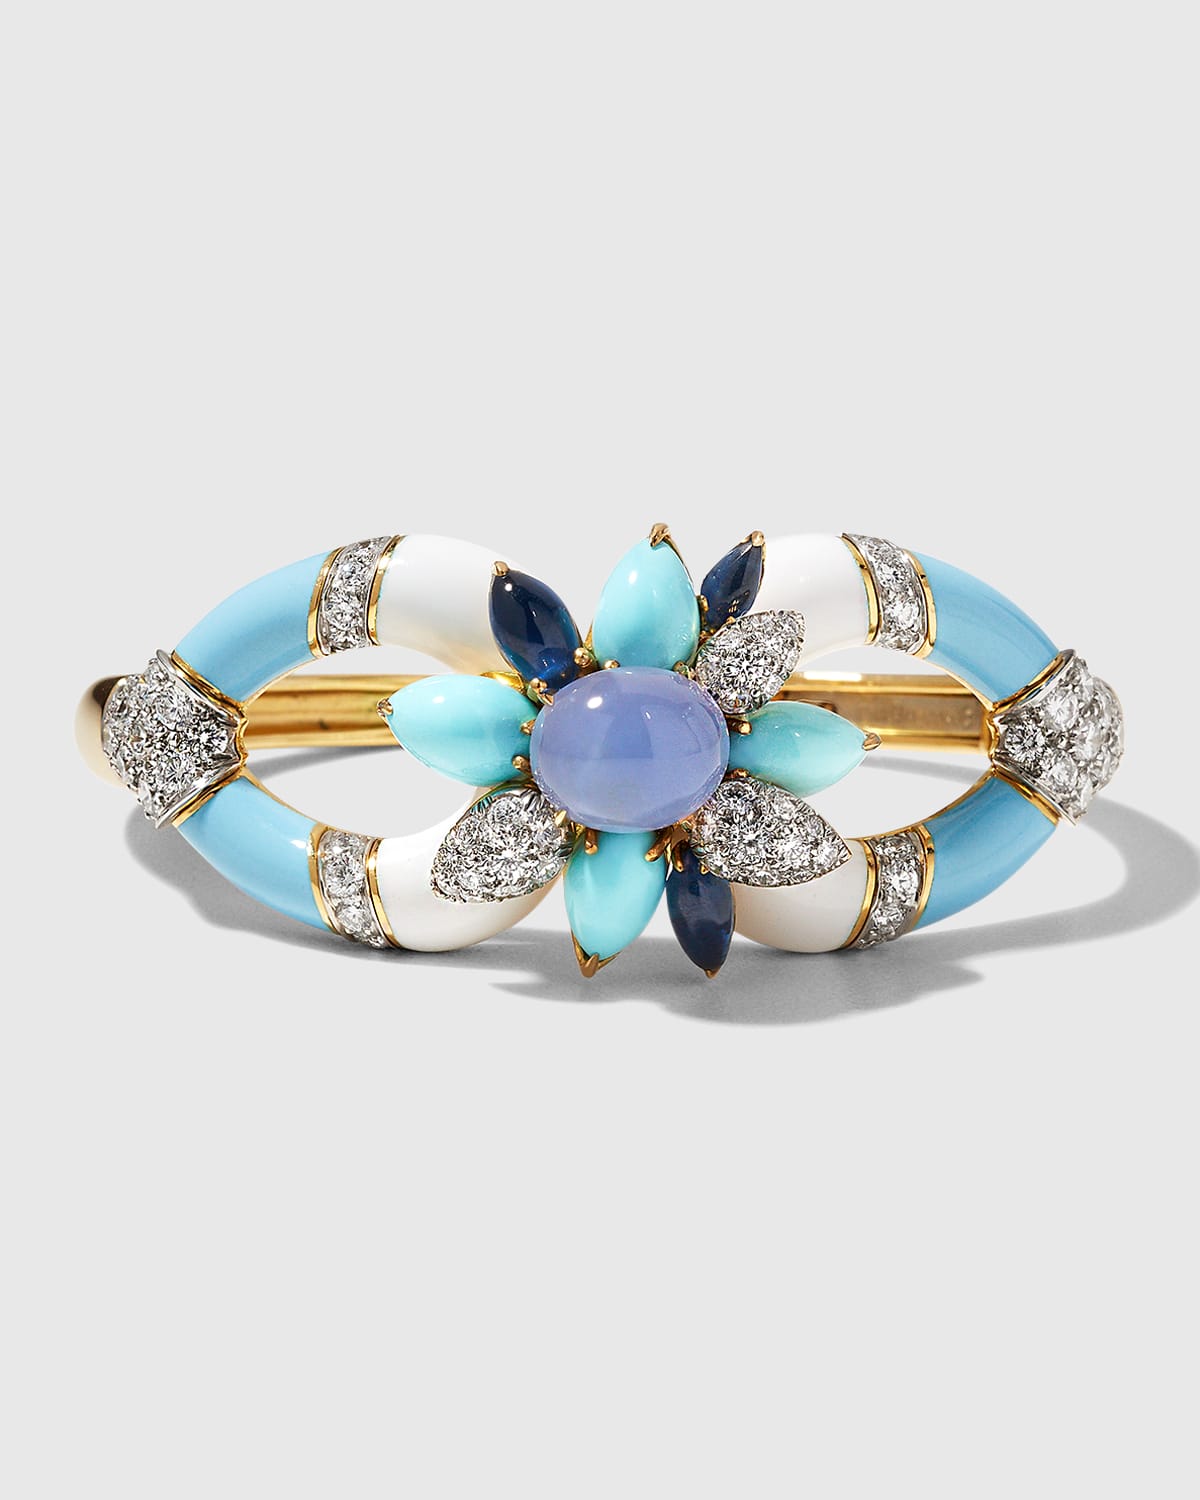 David Webb Yellow Gold and Platinum Asheville Bracelet with Blue Chalcedony and Turquoise